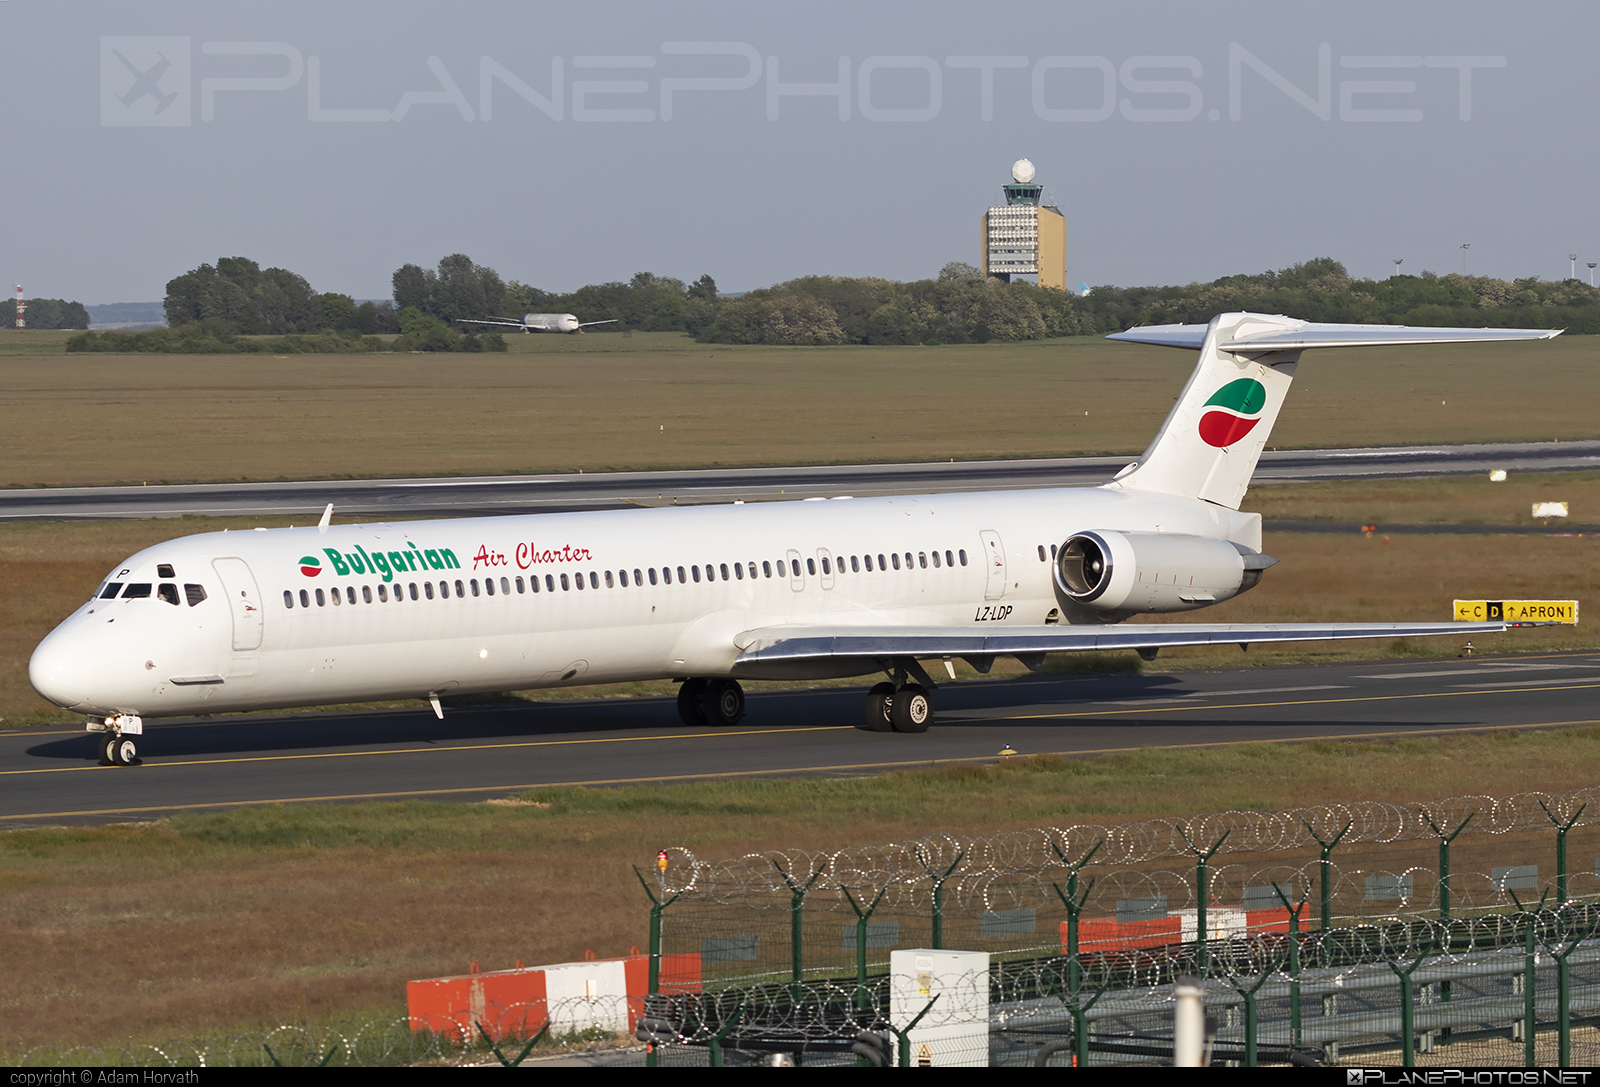 McDonnell Douglas MD-82 - LZ-LDP operated by Bulgarian Air Charter #bulgarianaircharter #mcDonnellDouglas #mcdonnelldouglas80 #mcdonnelldouglas82 #mcdonnelldouglasmd80 #mcdonnelldouglasmd82 #md80 #md82